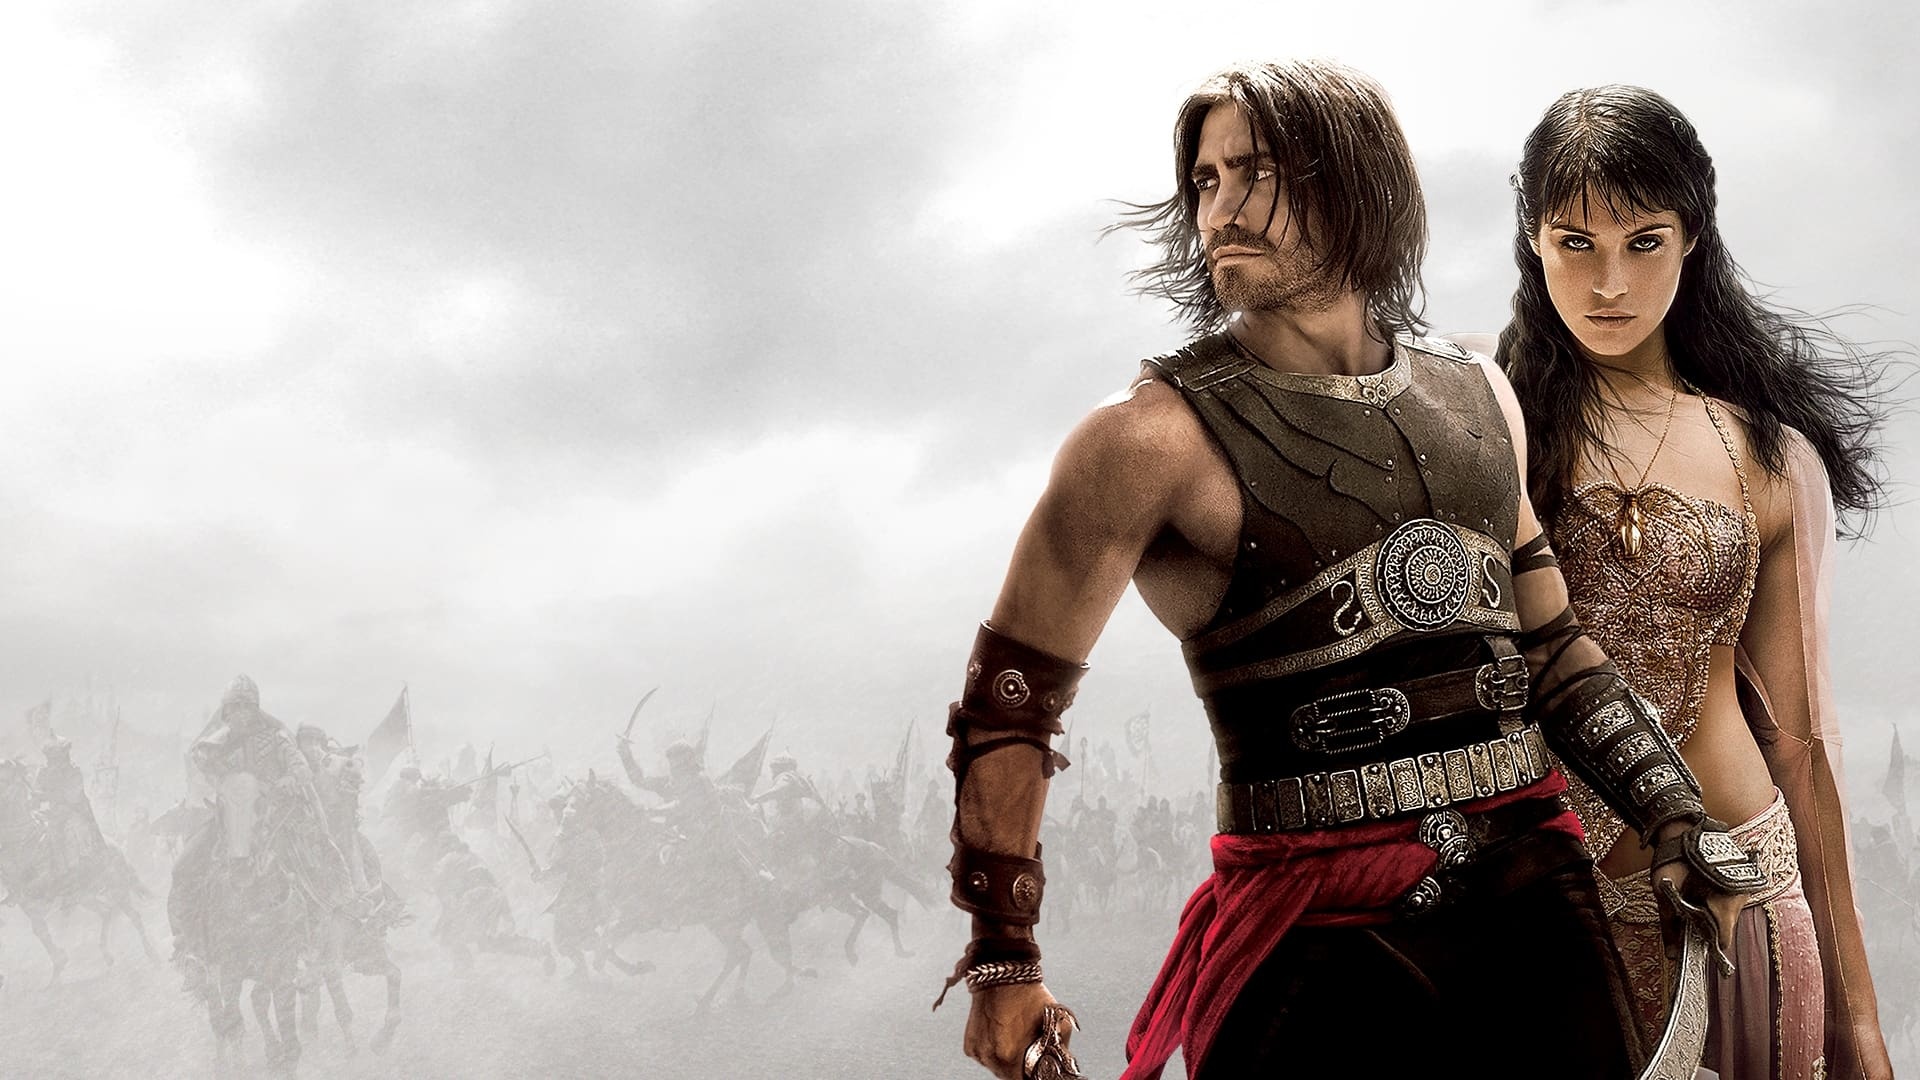 Prince of Persia (Movie): Produced by Jerry Bruckheimer, Music by Harry Gregson-Williams. 1920x1080 Full HD Background.